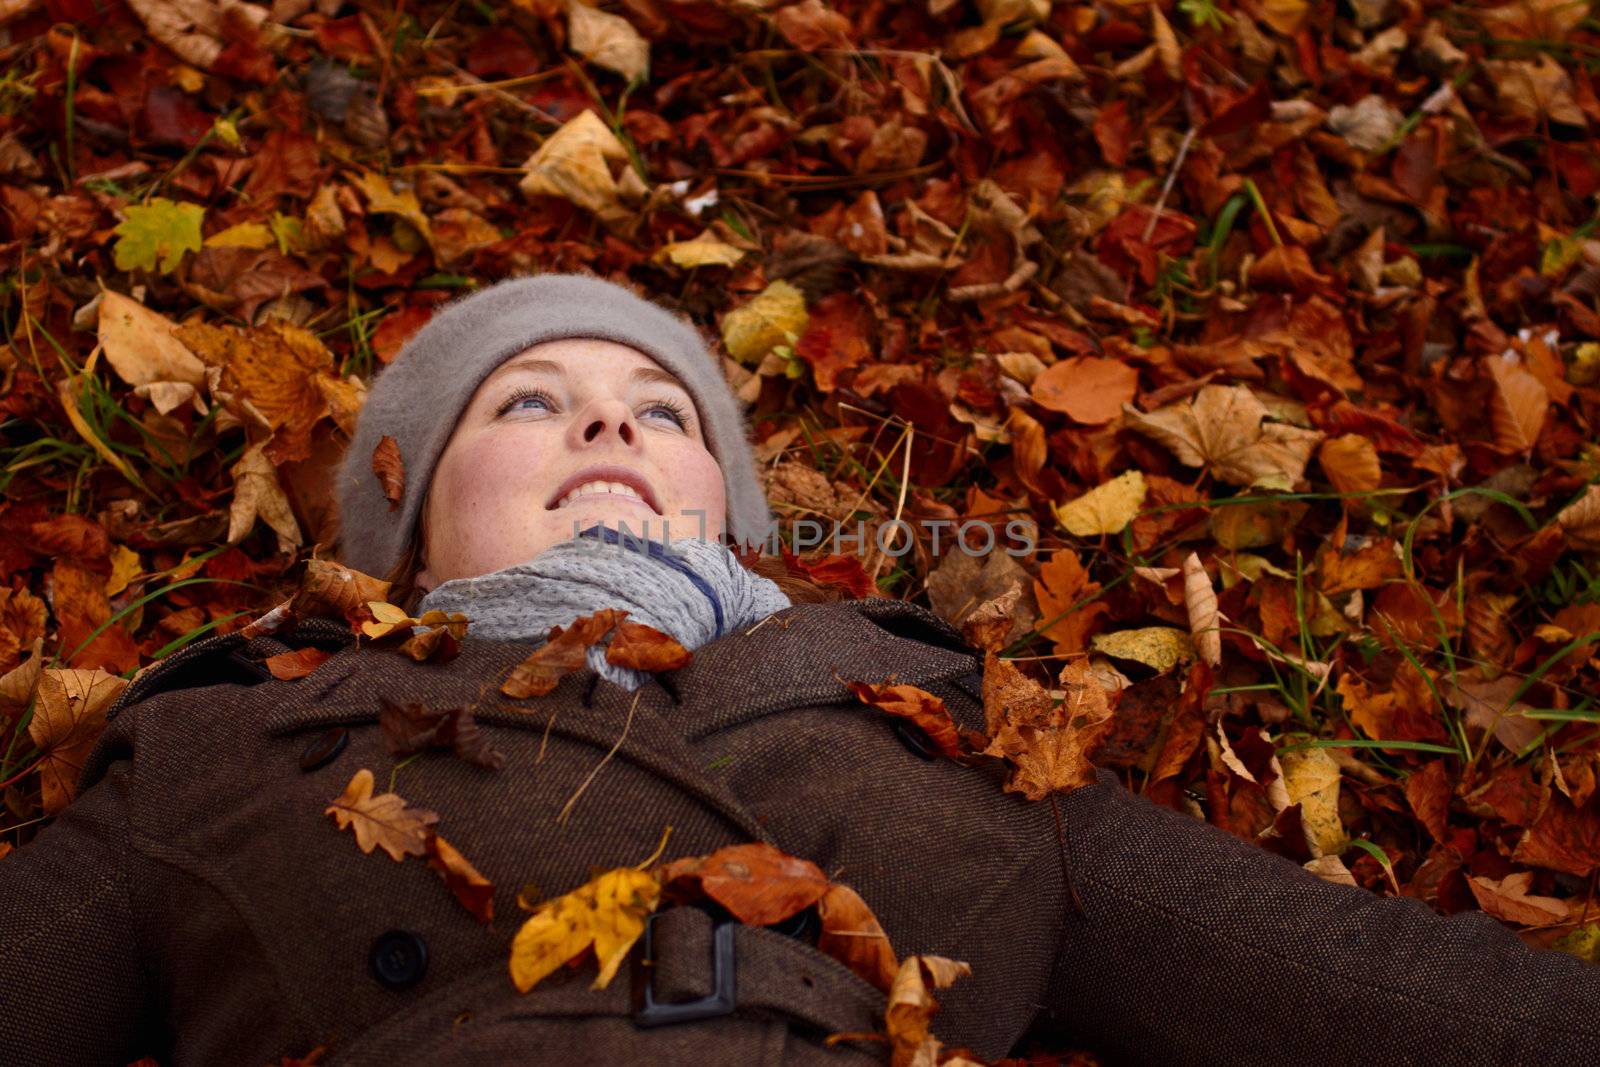 Autumn - young woman lying down in leaves